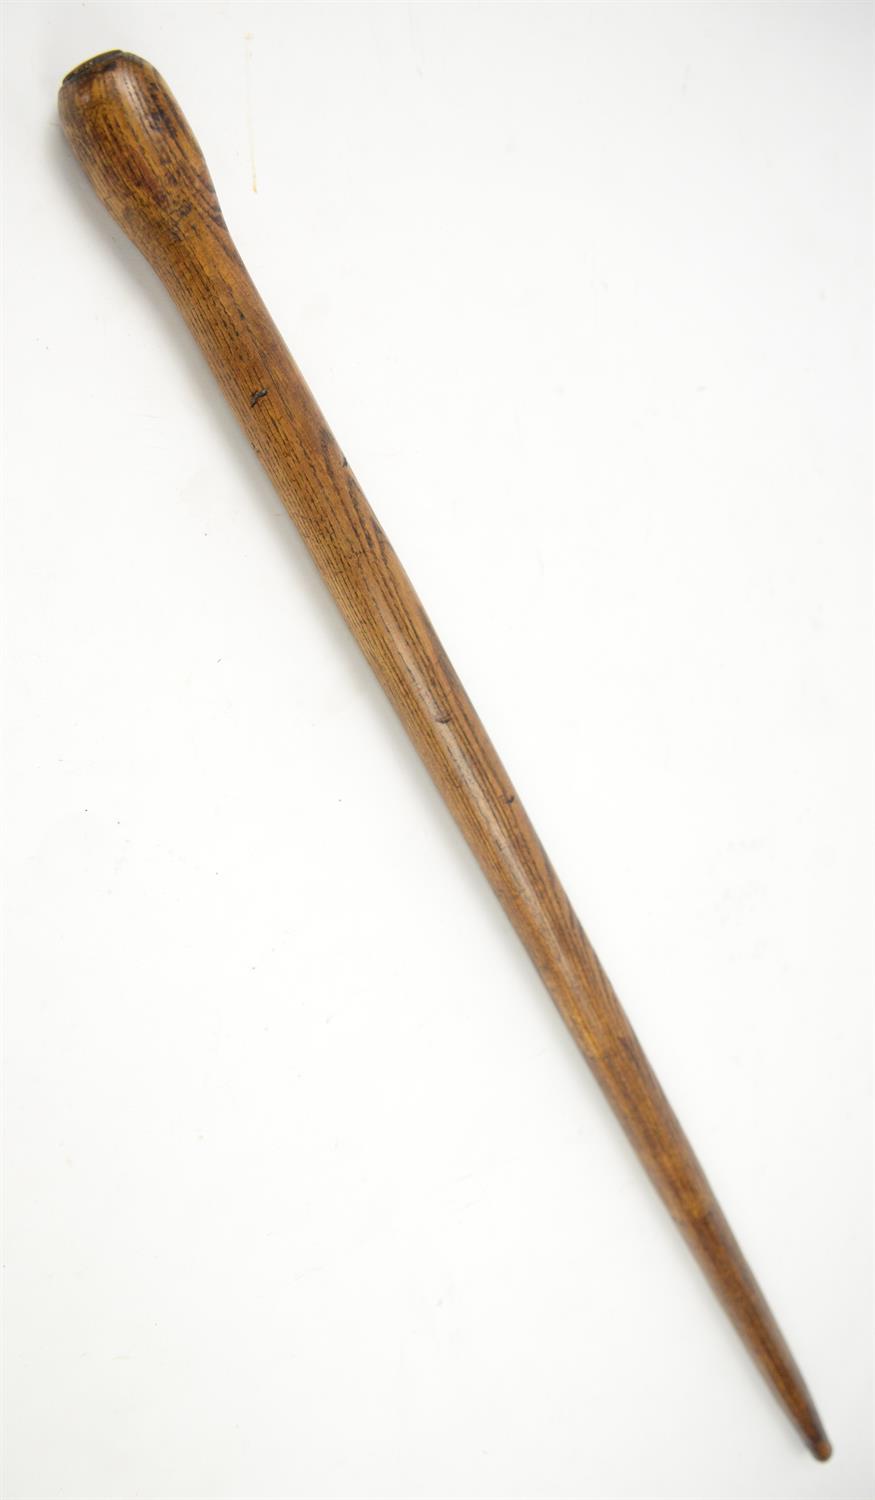 Early 20th century ash flick stick with brass mount and steel spike, 92.5cm long with spike in